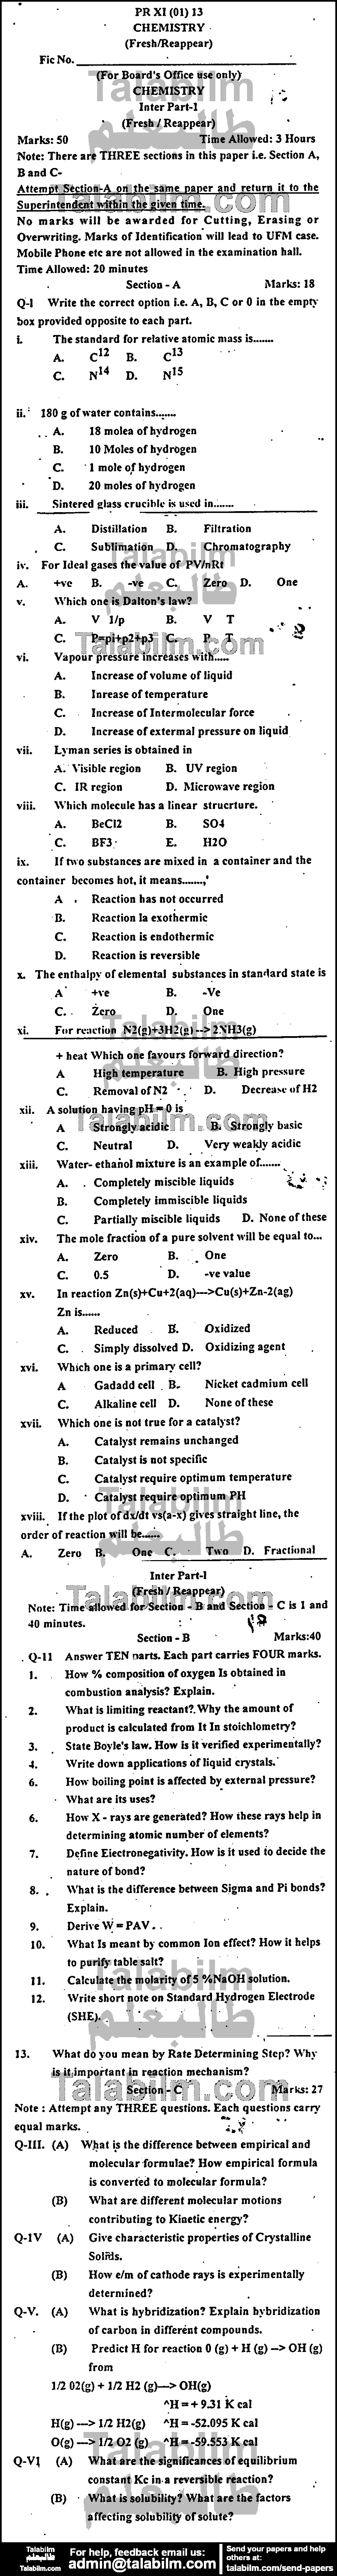 Chemistry 0 past paper for Group-I 2013